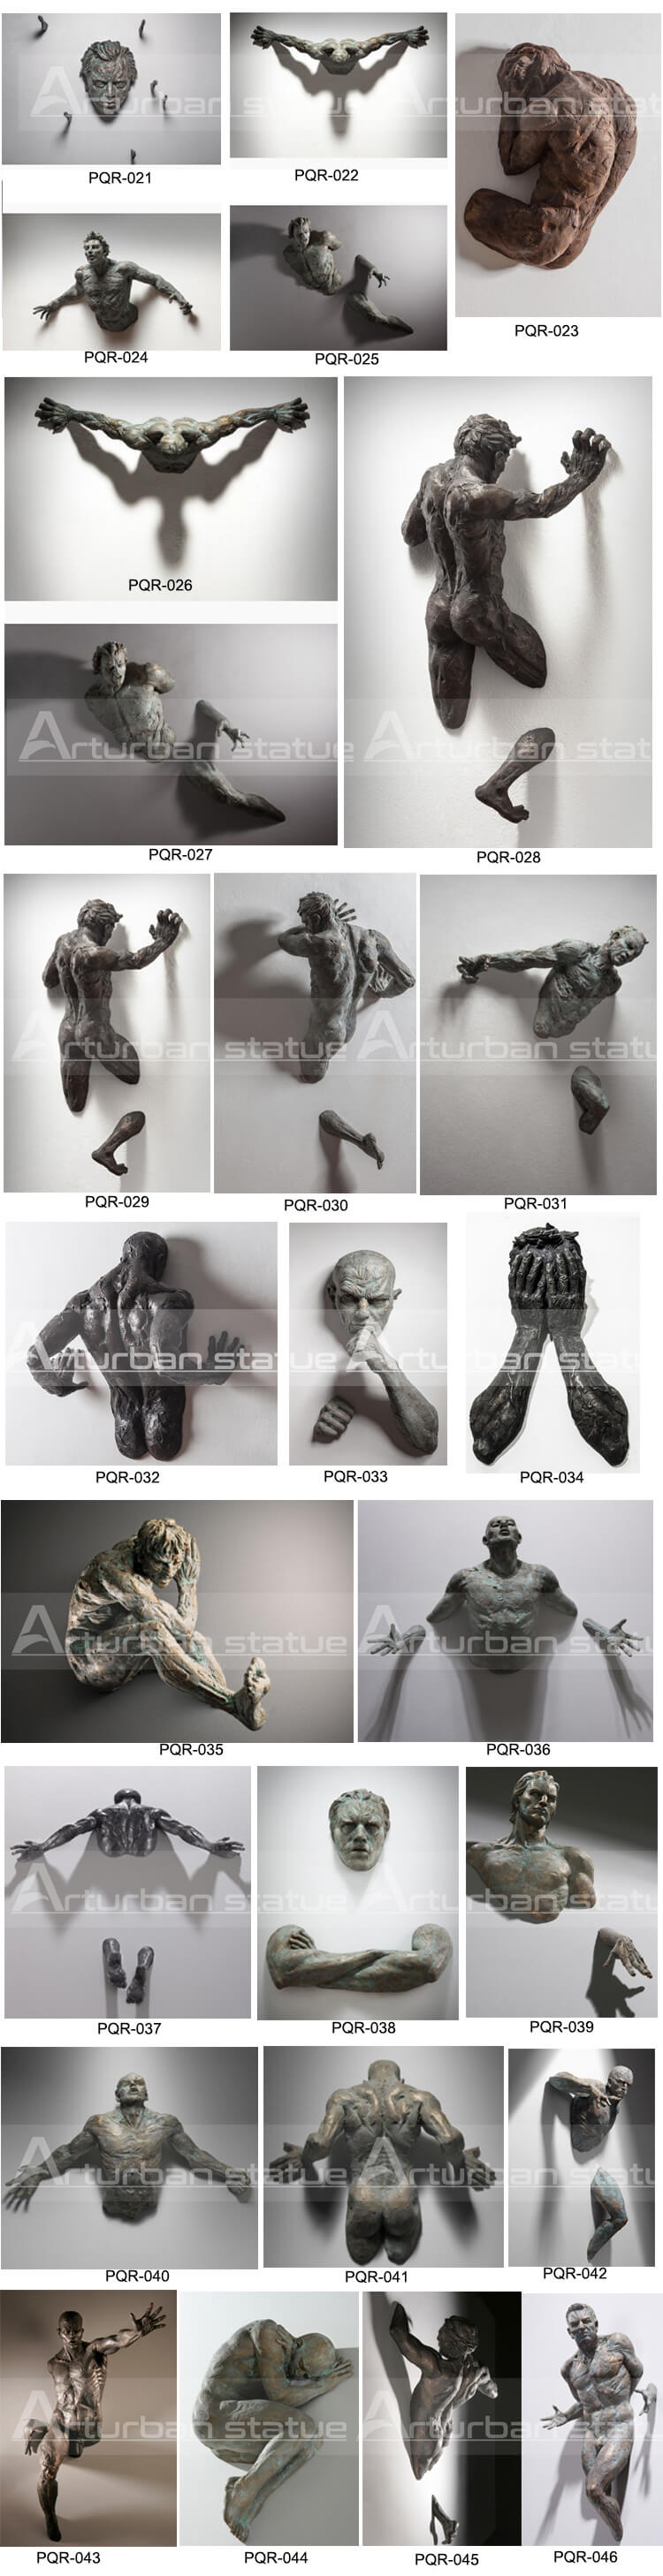 Matteo Pugliese Sculpture with different angles